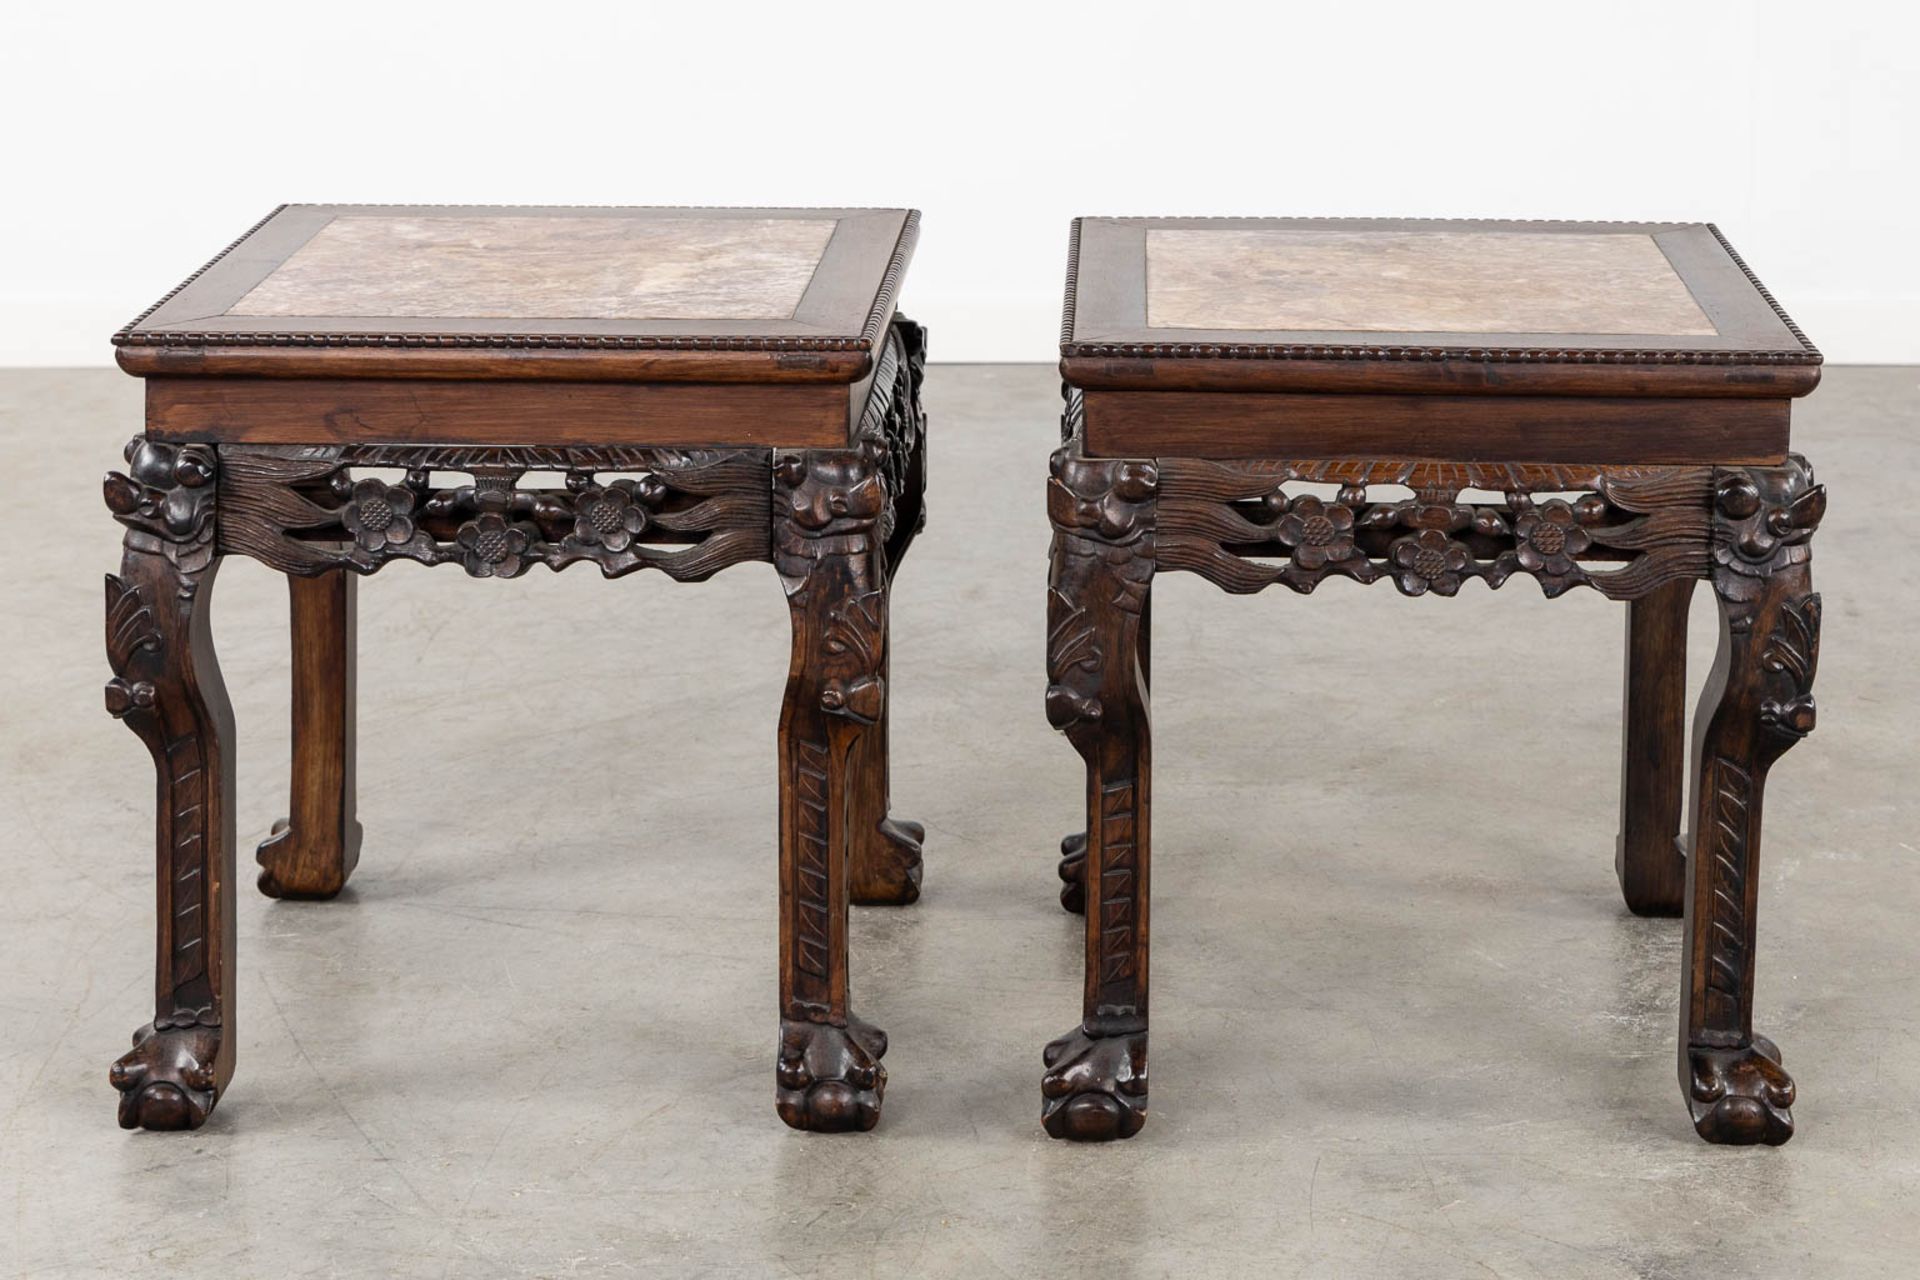 A pair of square Chinese side tables, hardwood with a marble top. (L:44 x W:44 x H:46 cm) - Bild 3 aus 11